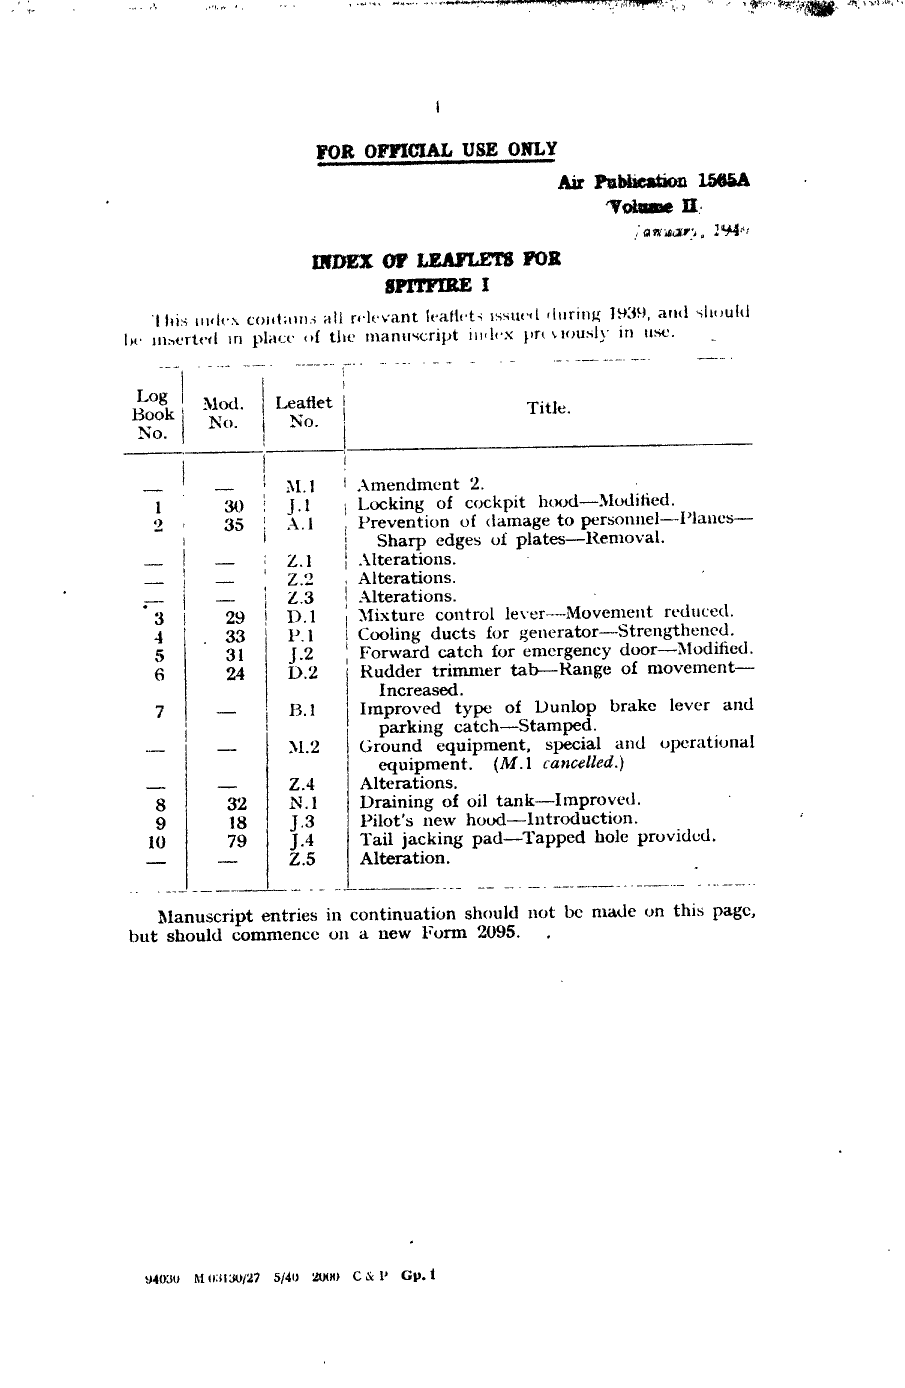 Sample page 1 from AirCorps Library document: Index of Leaflets for Spitfire I